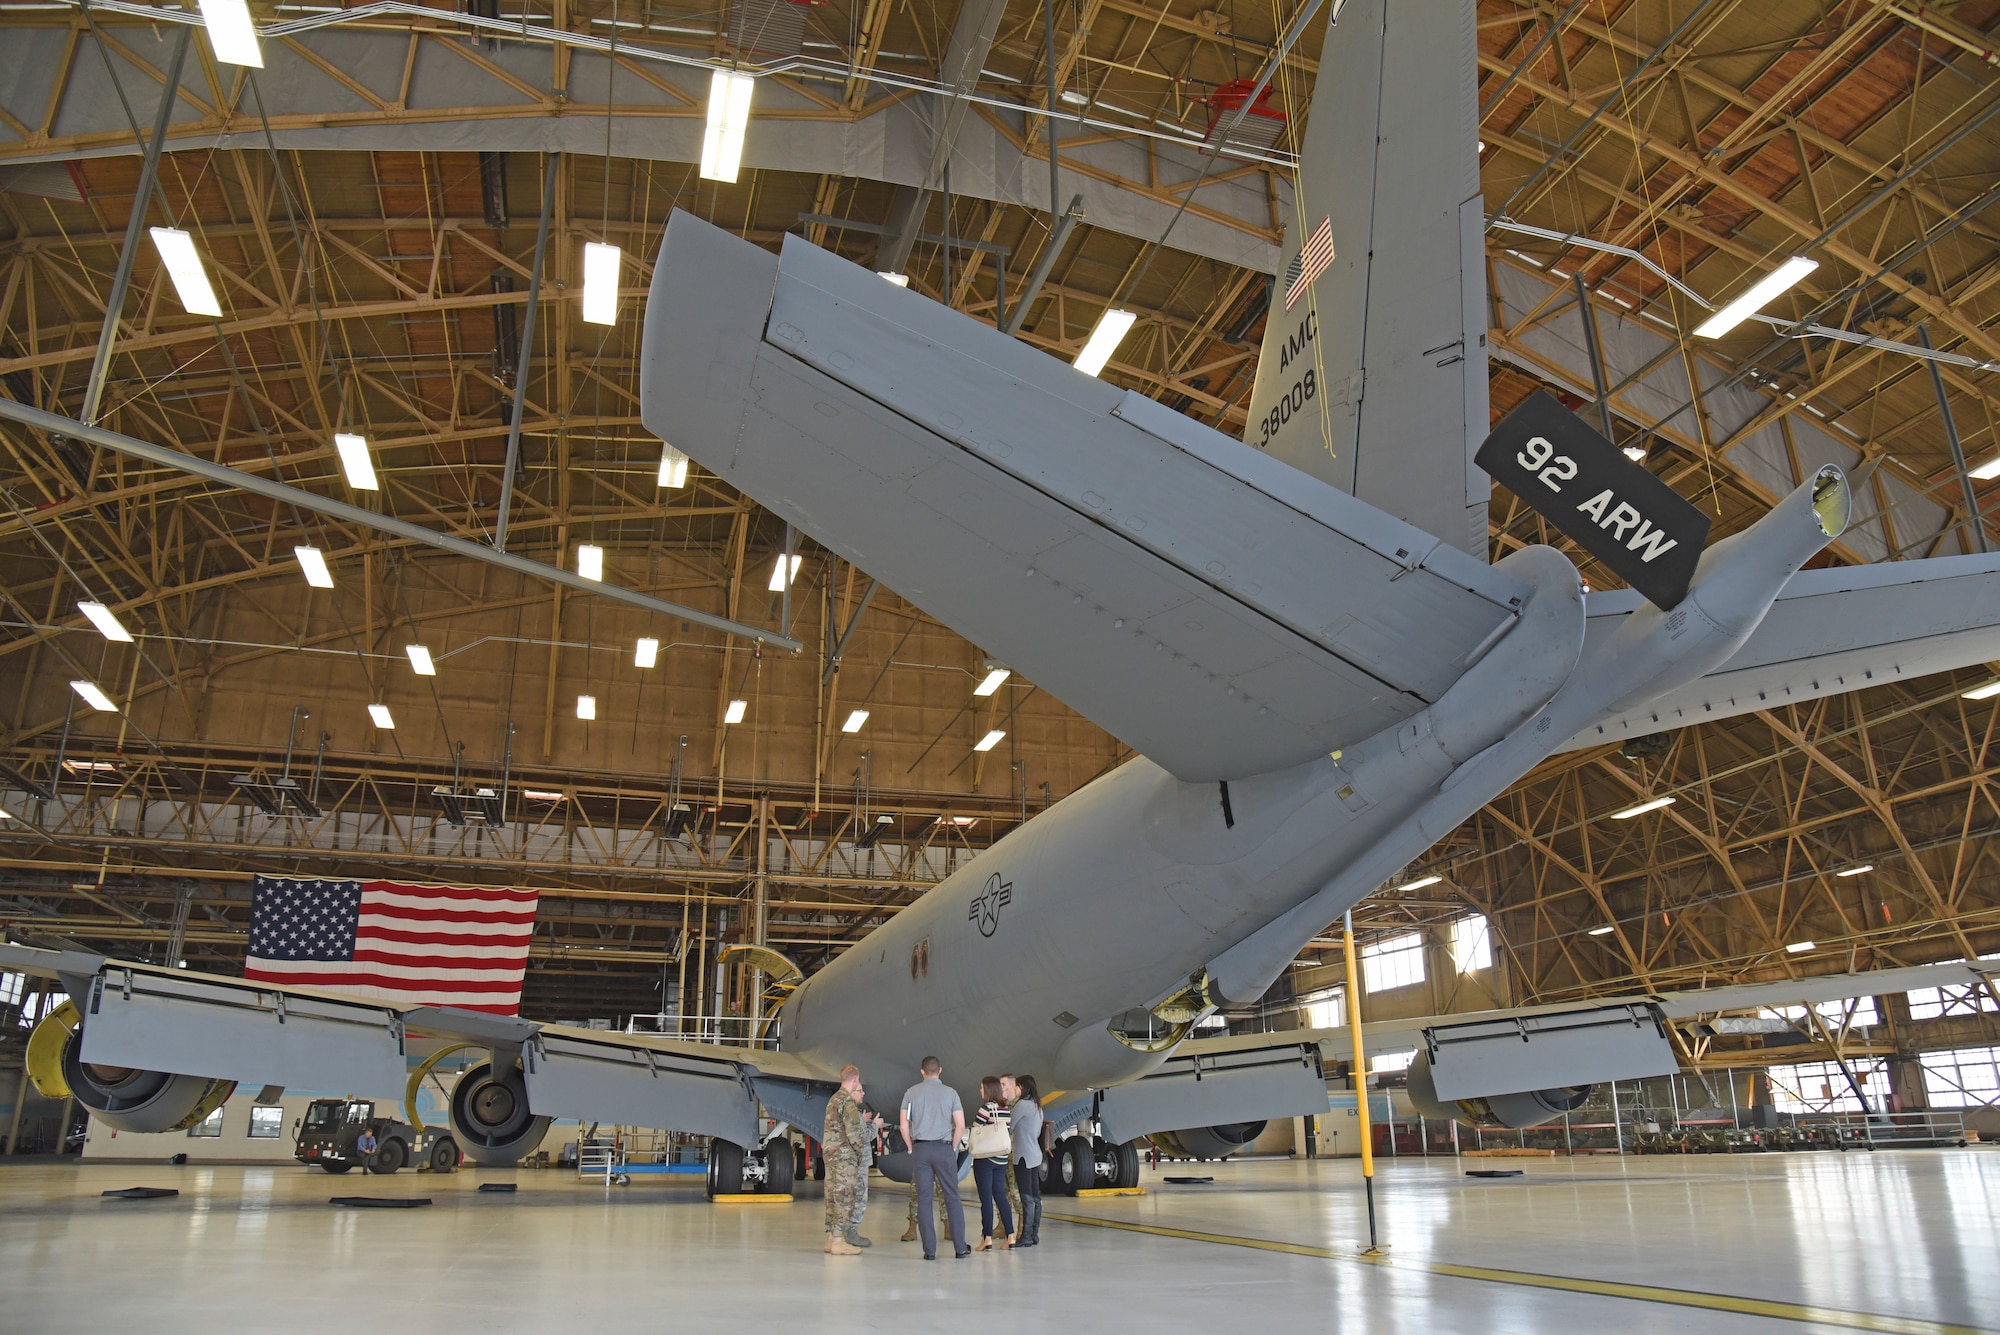 Members of the 92nd Maintenance Group explain the strategic importance of the KC-135 Stratotanker to congressional staffers during a tour Oct. 18, 2018, at Fairchild Air Force Base, Washington. Members of the 92nd Operations Group and 92nd MXG gave staffers a tour of the KC-135, highlighting various aspects of the aircraft including the boom and Block 45 upgrade. (U.S. Air Force photo/Staff Sgt. Mackenzie Mendez)